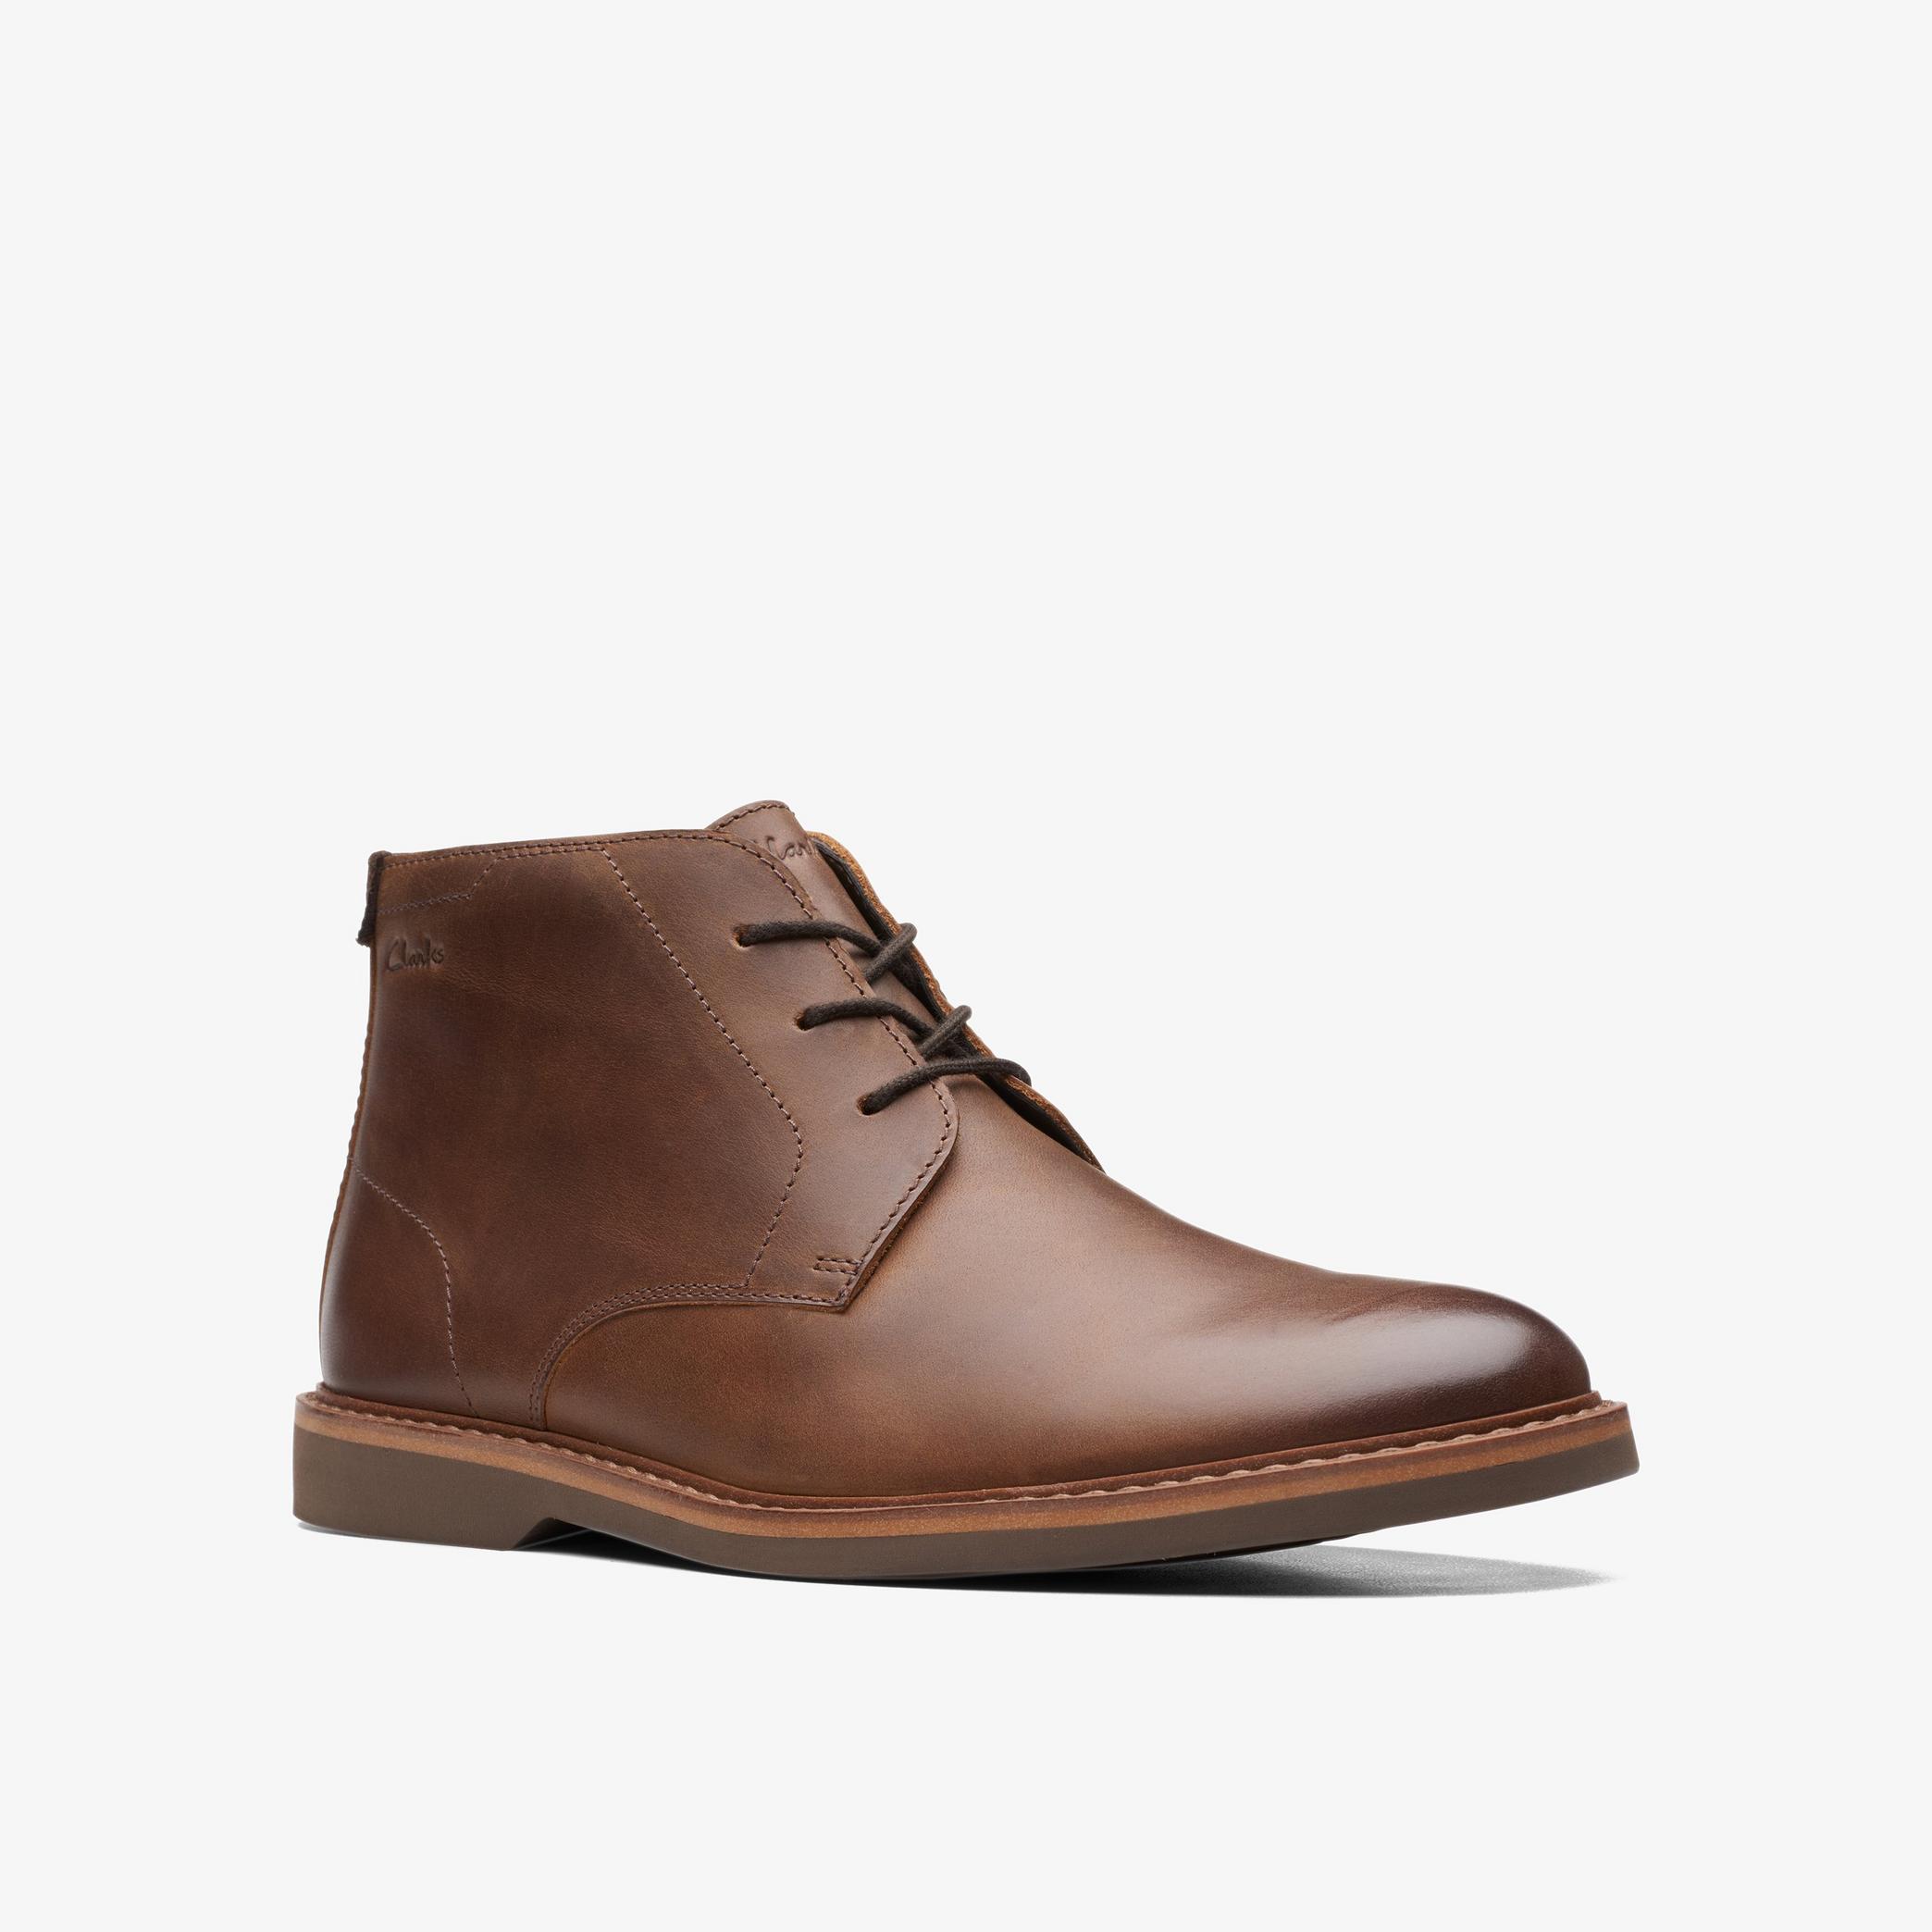 MENS AtticusLT Mid Dark Tan Leather Ankle Boots | Clarks Outlet